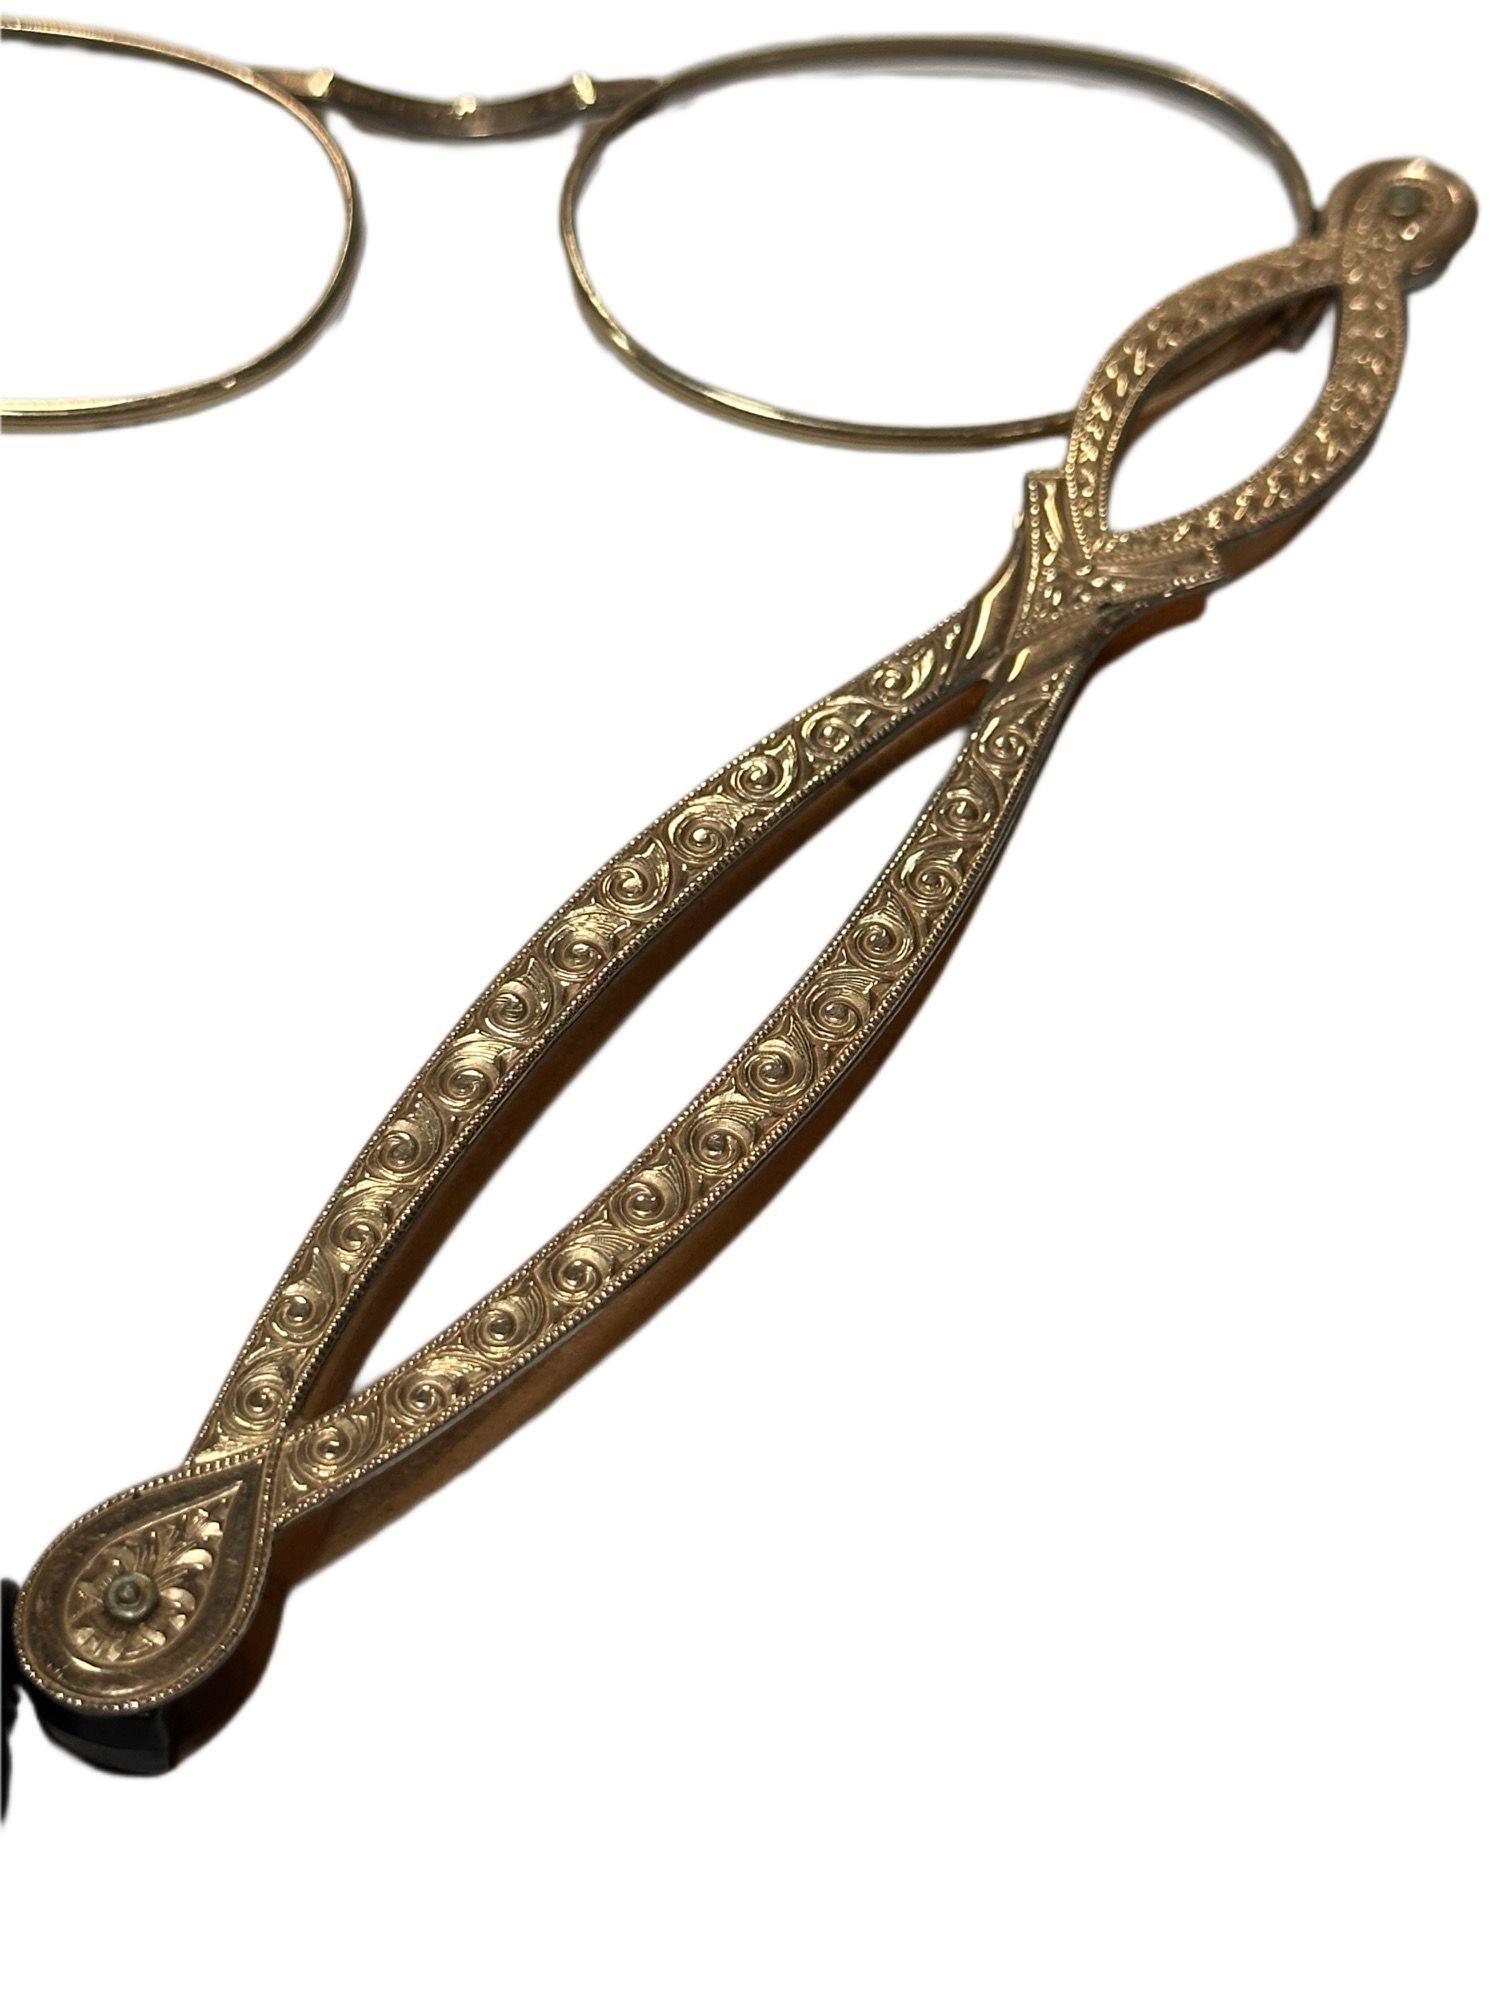 A 1/10 Filled 12K Gold filled Lorgnette is tied to a velvet string, no glass wear included. Very intricate and detailed Handles.
The Victorian lorgnette is a delicate and ornate accessory, popularized during the 19th century. Made with fine